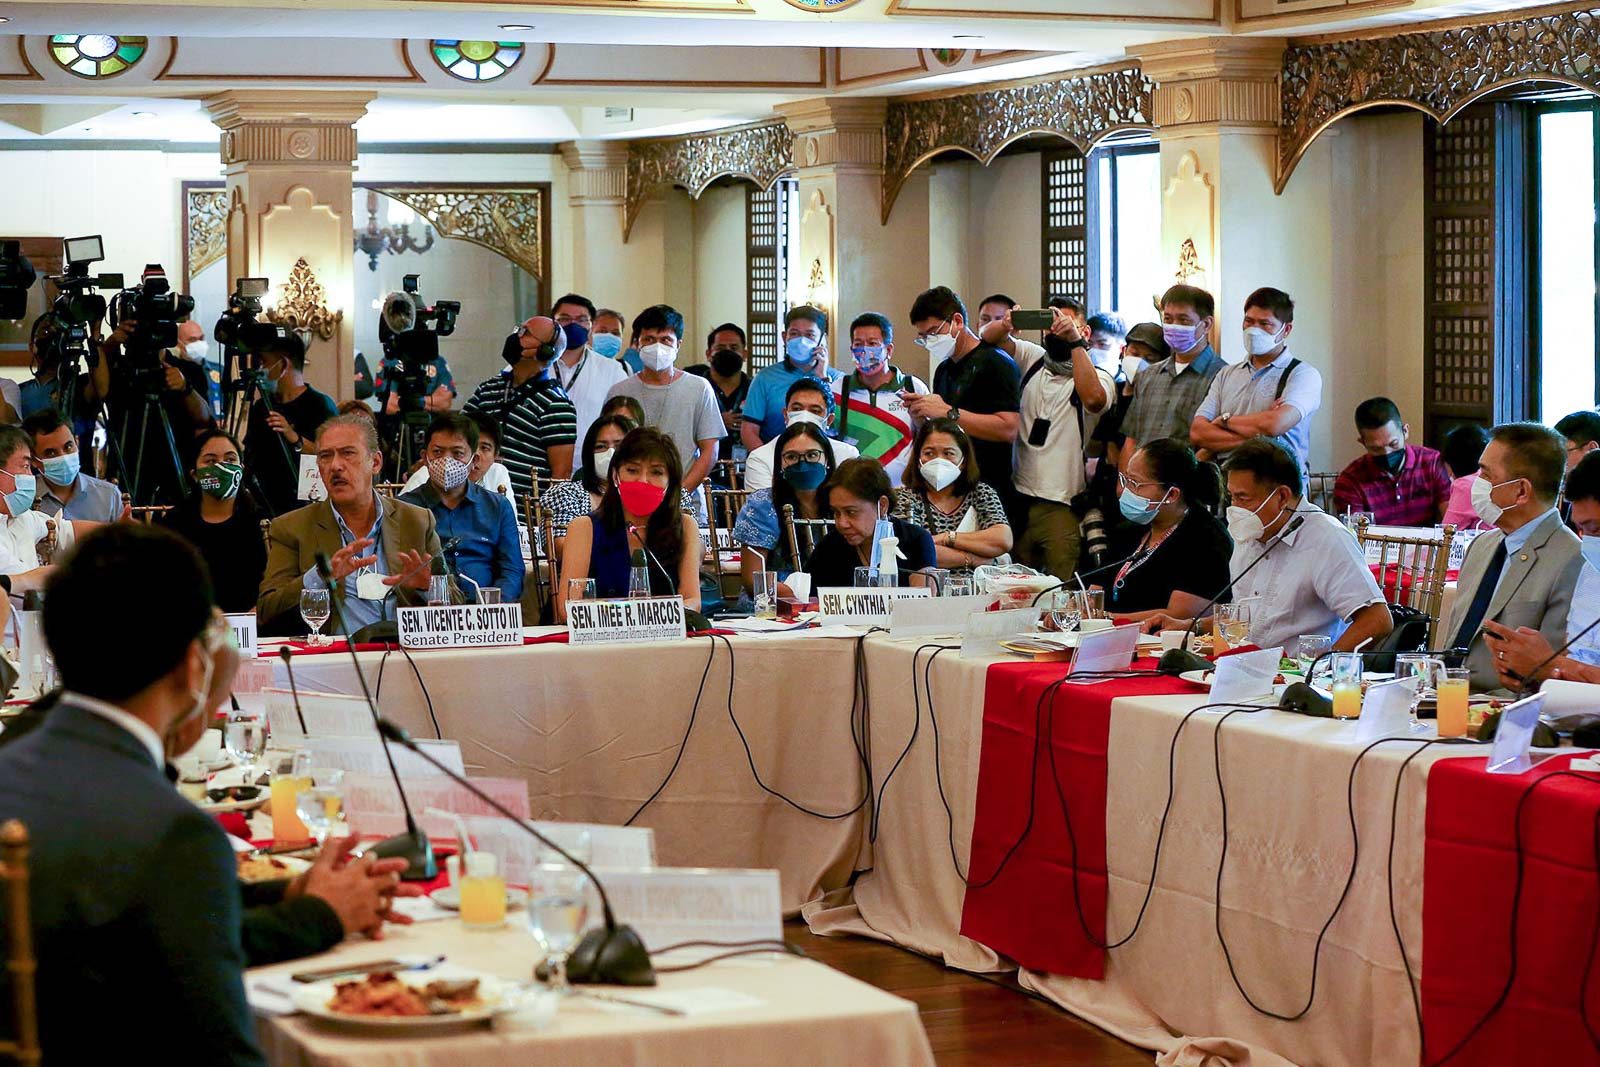 Comelec, Smartmatic assert no hacking after Senate panel’s claims